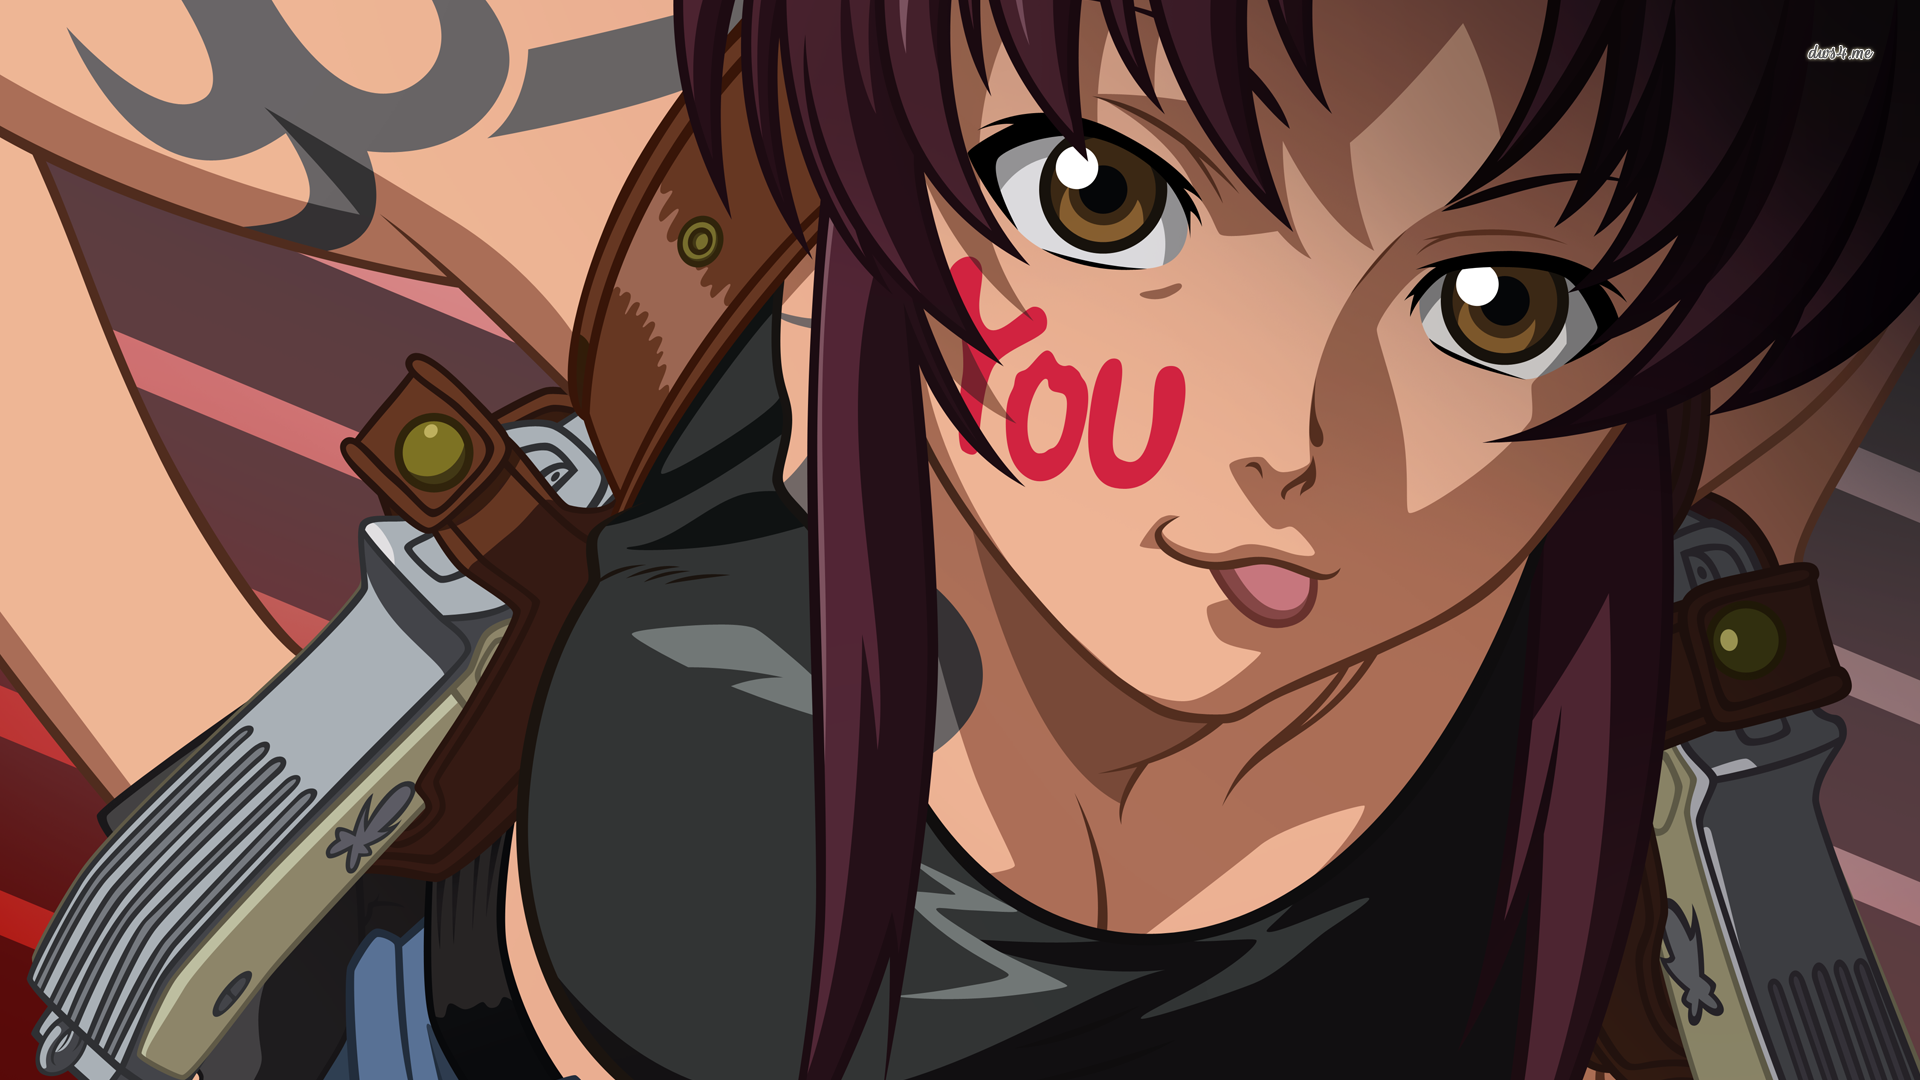 Revy Black Lagoon Wallpaper Online Discount Shop For Electronics Apparel Toys Books Games Computers Shoes Jewelry Watches Baby Products Sports Outdoors Office Products Bed Bath Furniture Tools Hardware Automotive